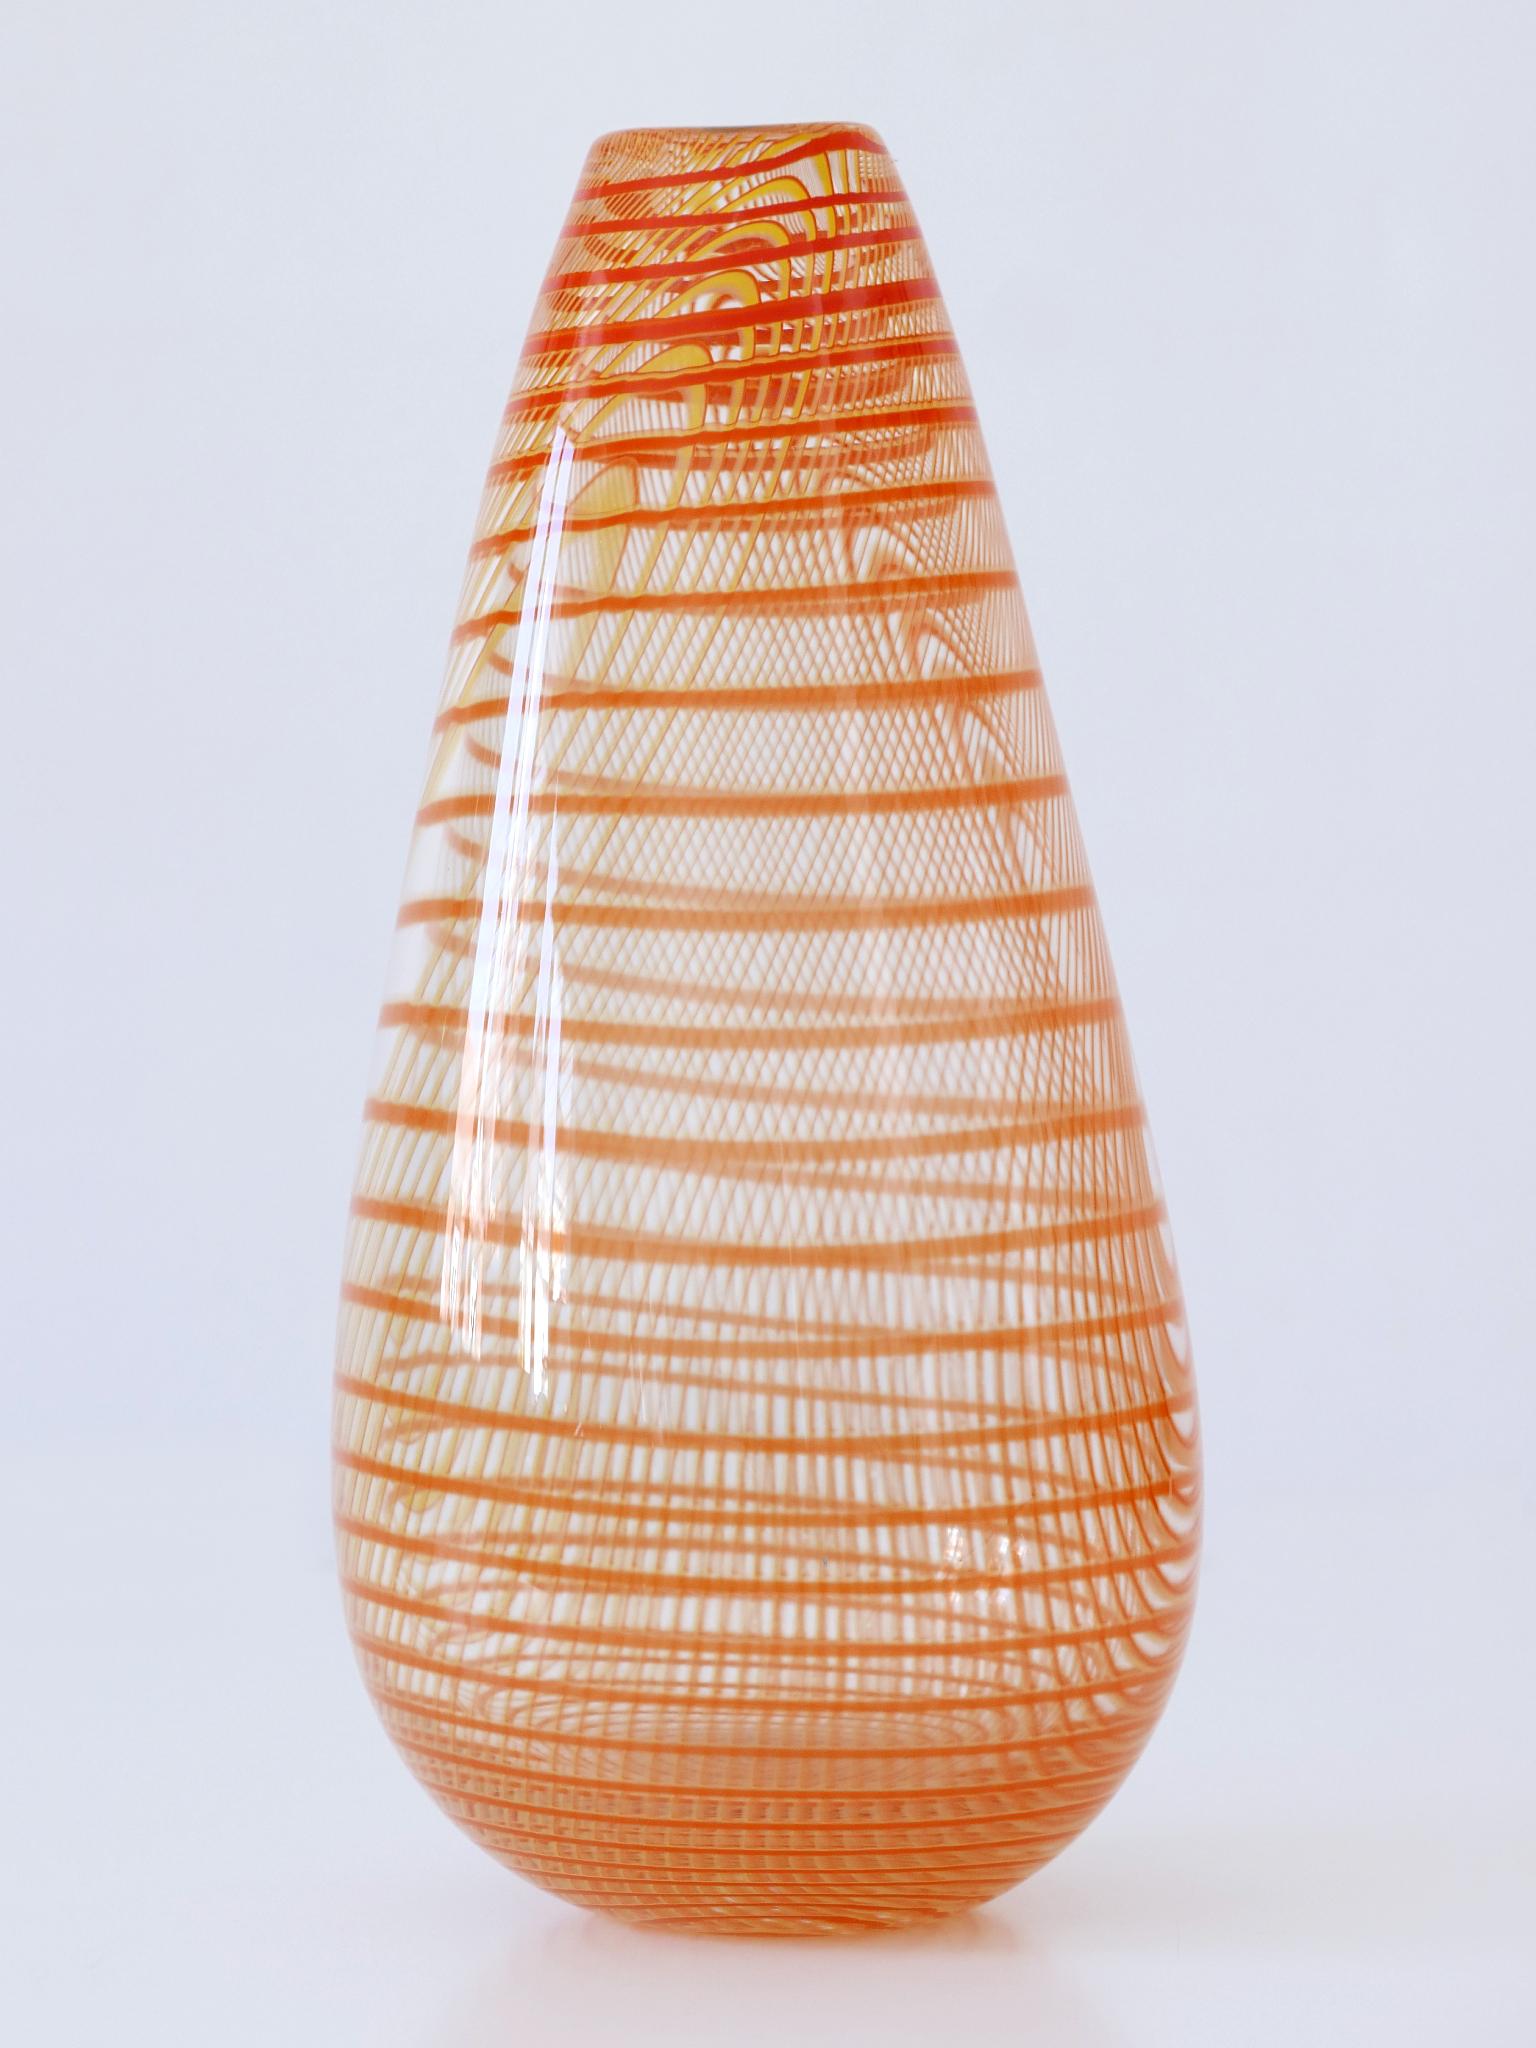 Signed & Limited Edition Art Glass Vase by Olle Brozén for Kosta Boda Sweden For Sale 2